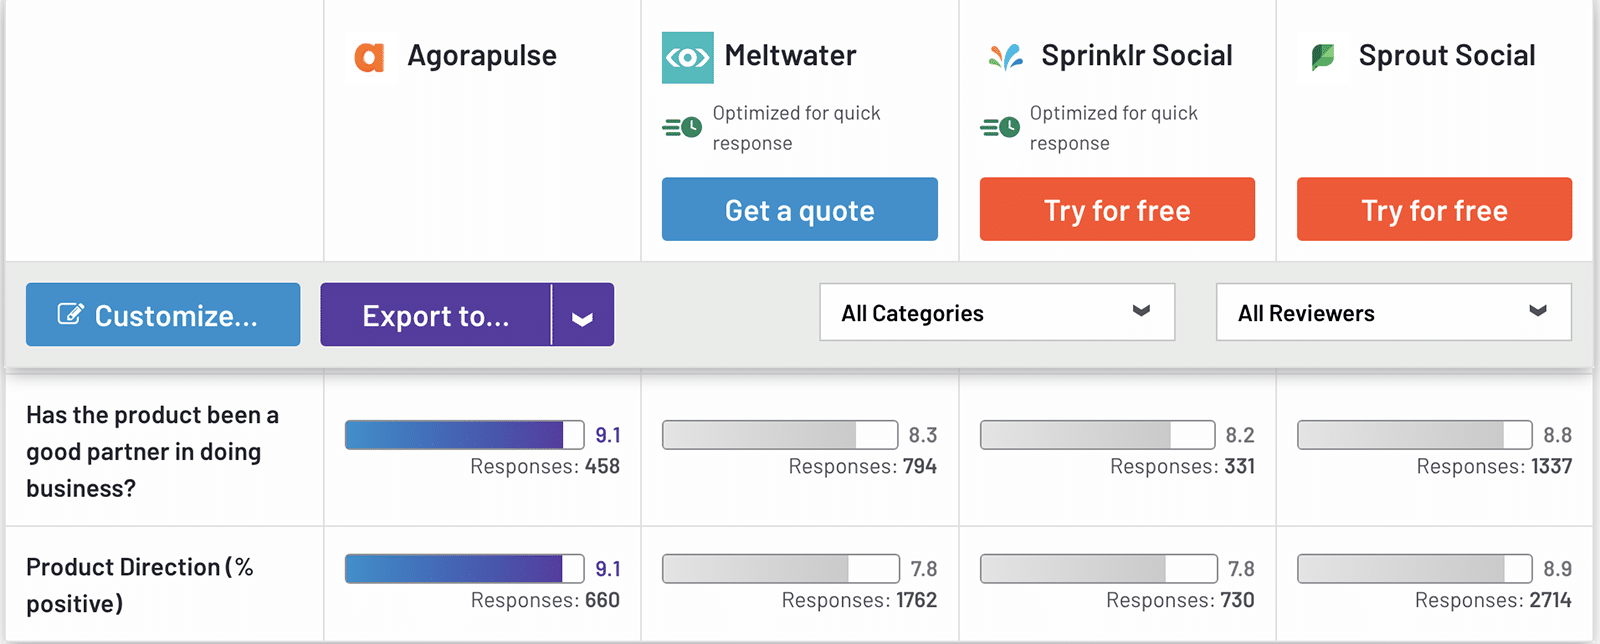 G2 comparison between Agorapulse, Meltwater, Sprinklr, and Sprout Social showing product direction